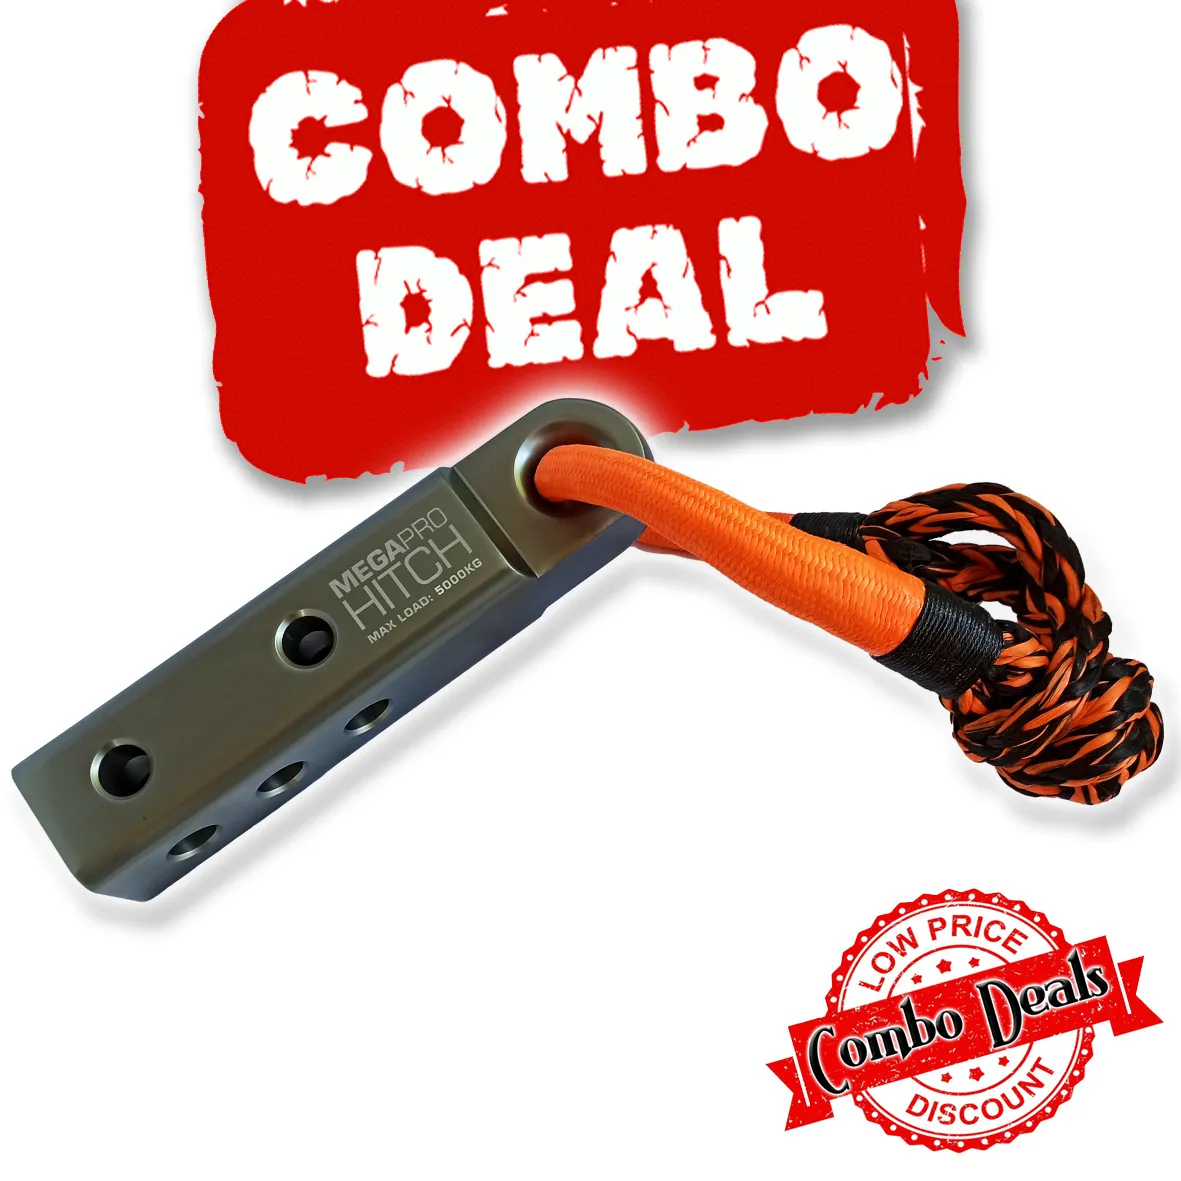 Carbon Recovery Hitch and Soft Shackle Combo Deal - CW-COMBO-MFSS-MP5TH 2